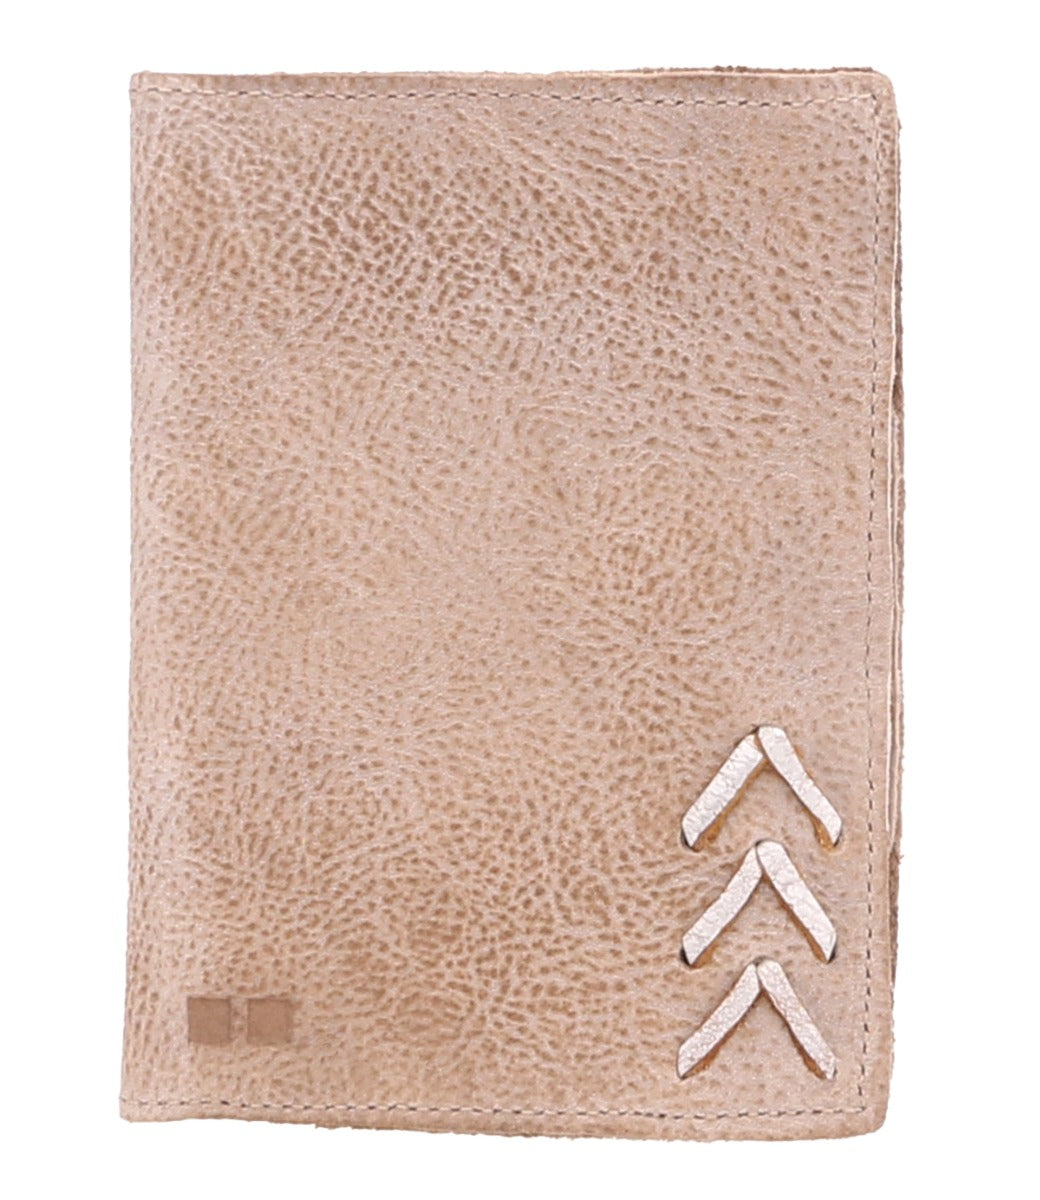 A beige leather Stardust wallet with an arrow on it by Bed Stu.